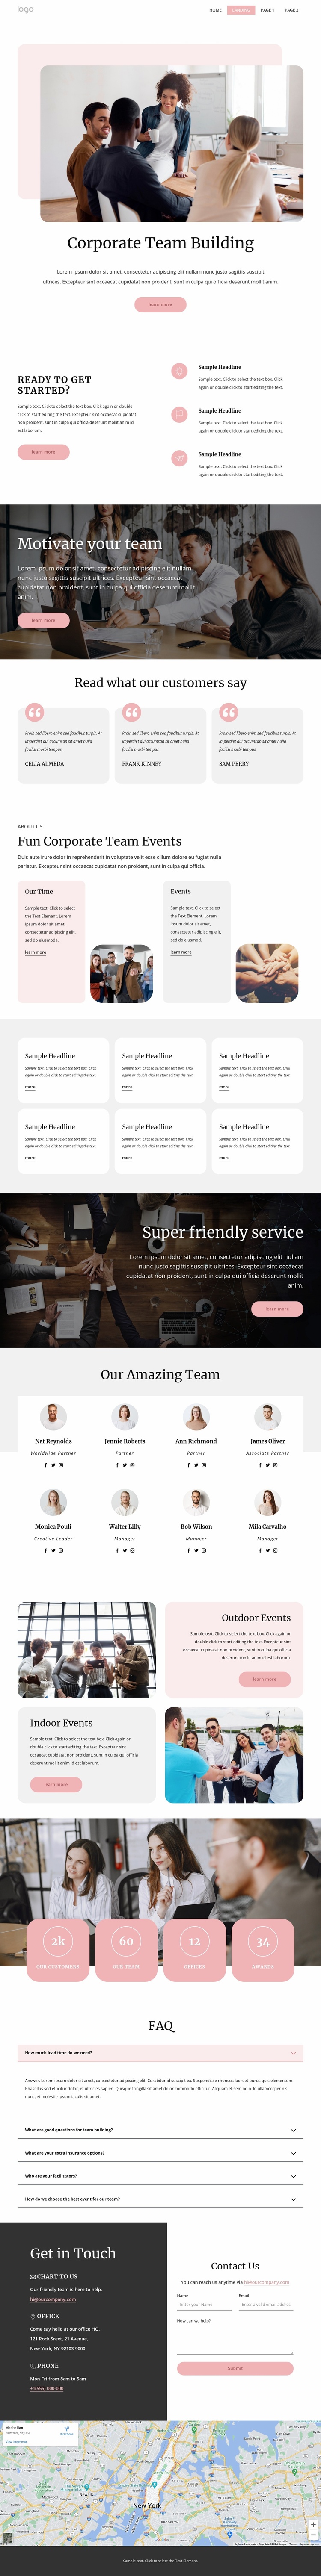 Corporate team building Landing Page